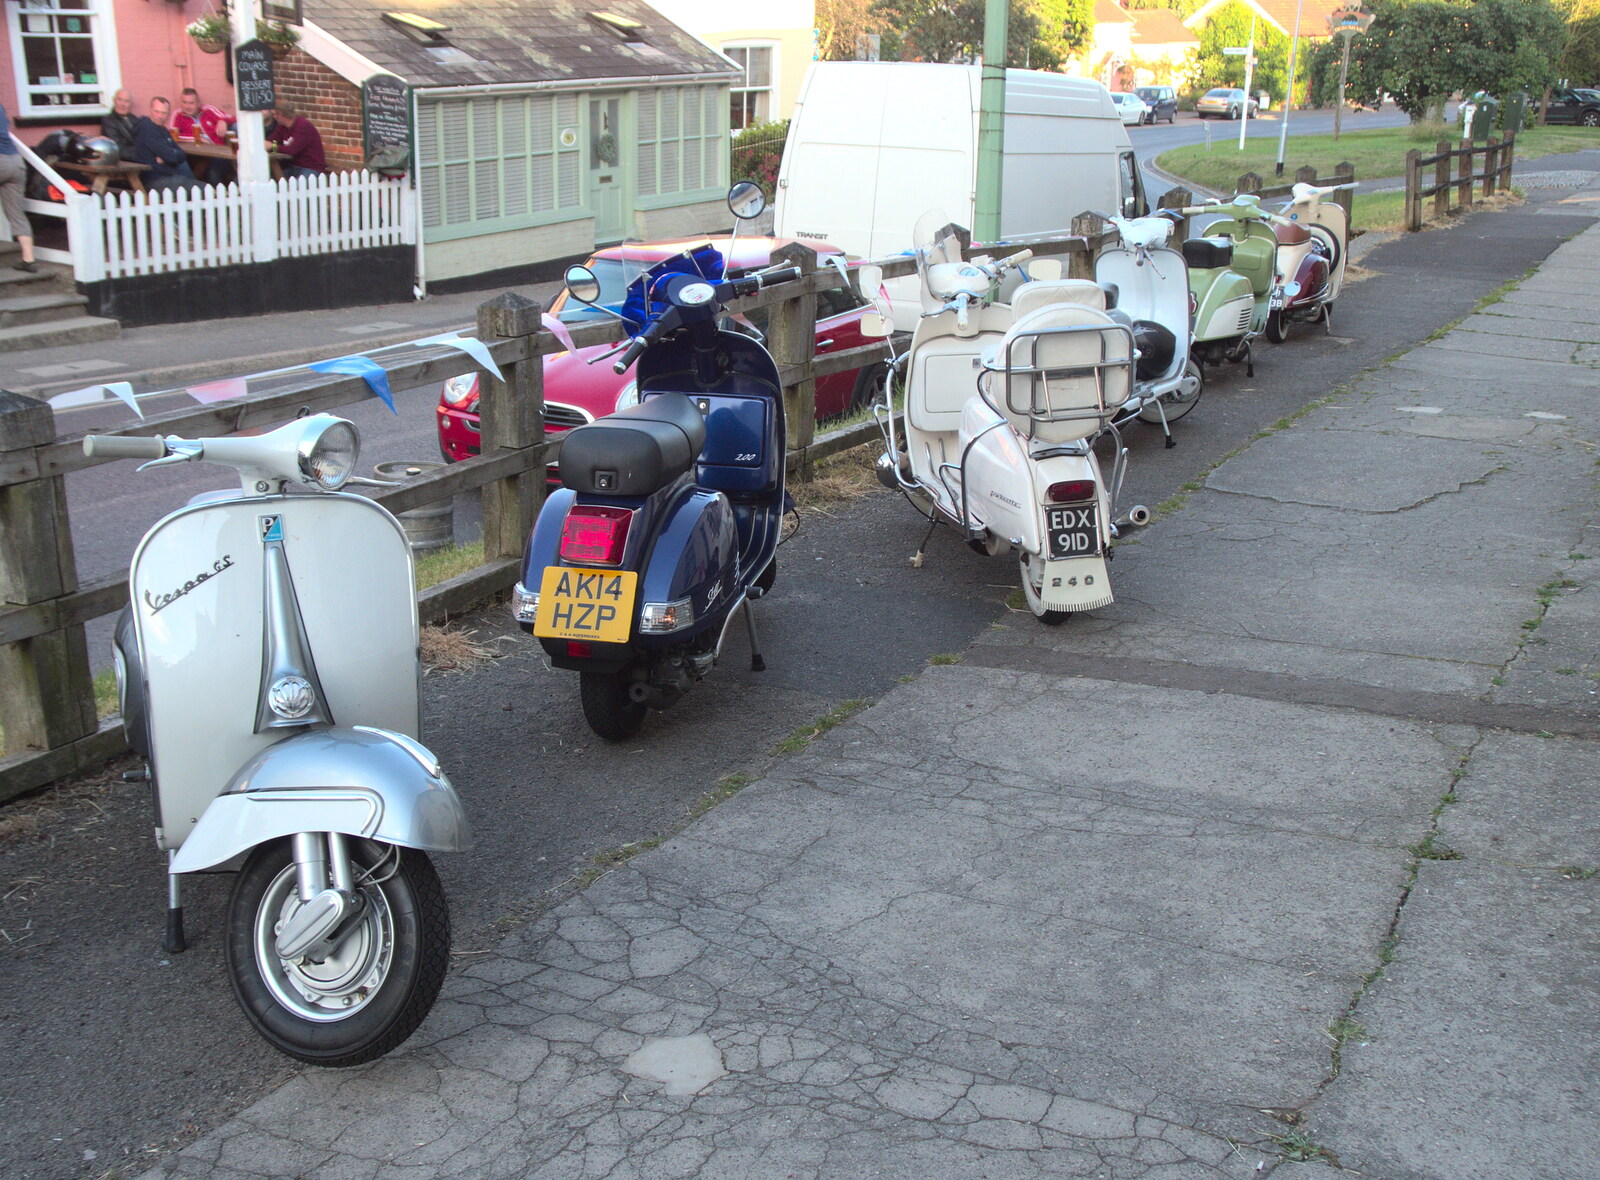 A bunch of mopeds outside the newsagent from The BSCC at the Woolpack, Debenham, Suffolk - 14th June 2018